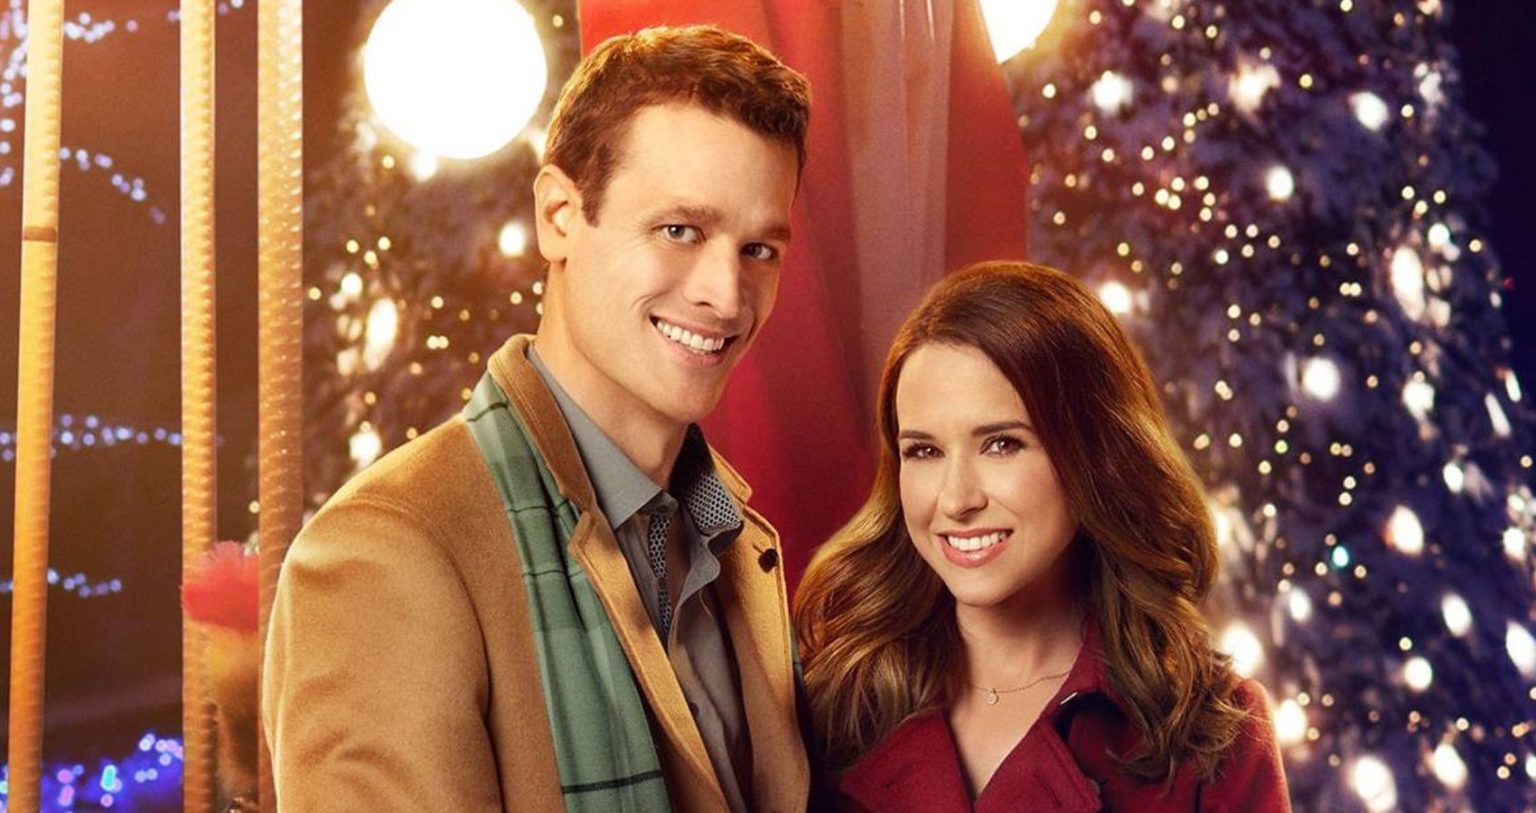 The 10 Worst Hallmark Movies Of The Decade (According To Rotten